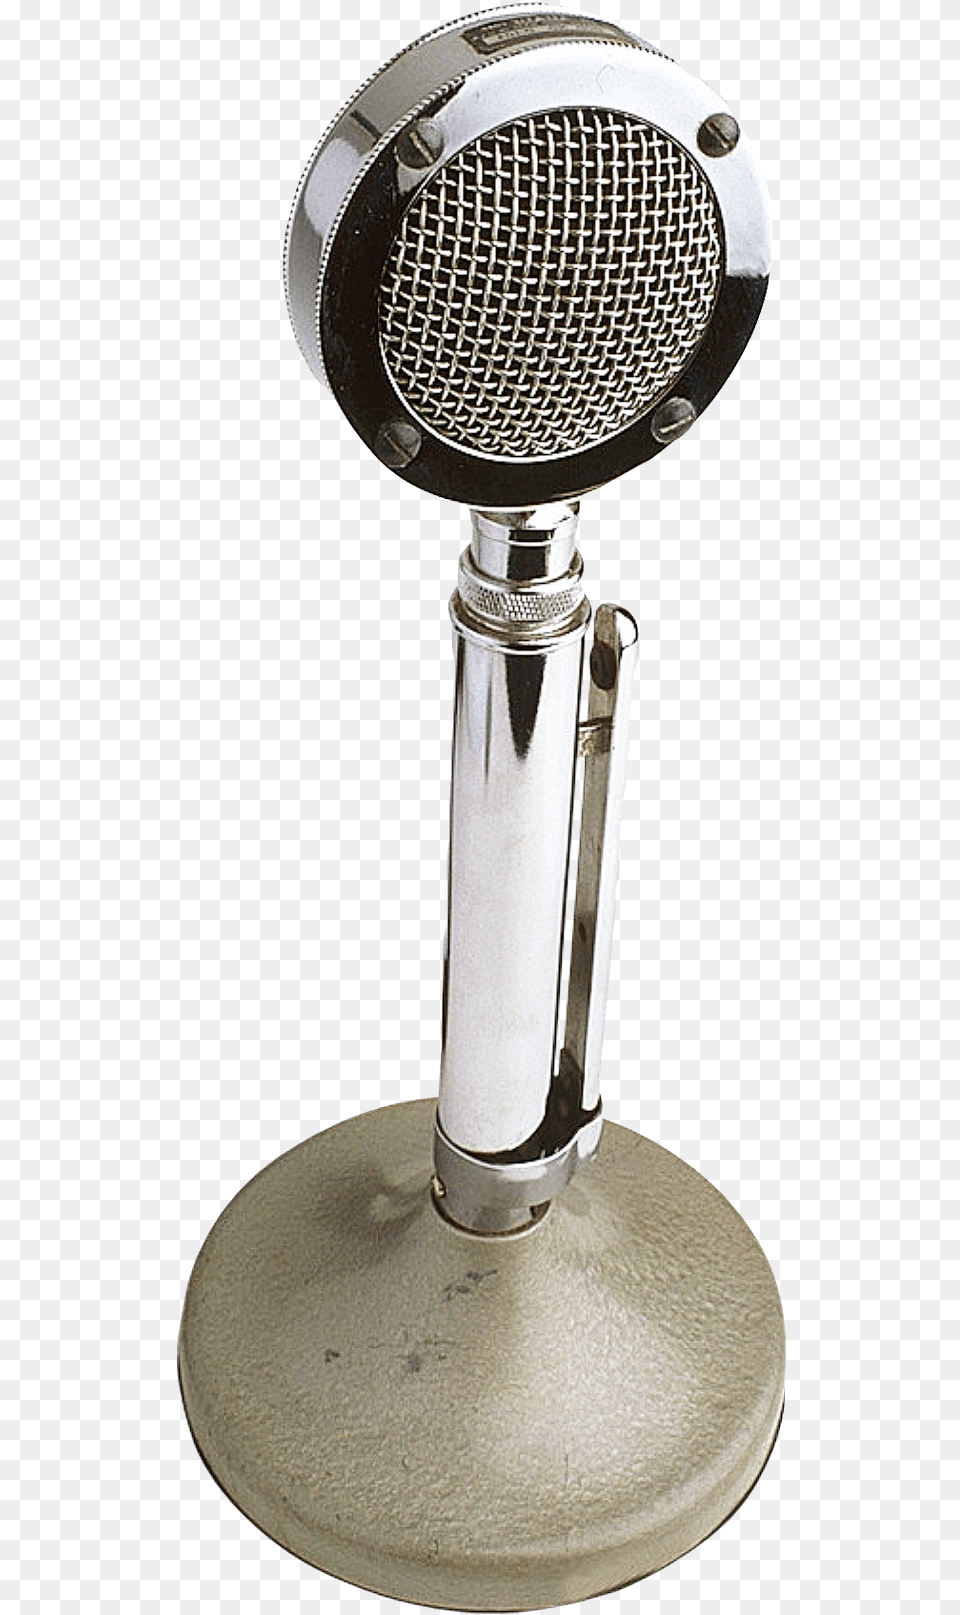 Microphone Transparent Image Pngpix Wireless Microphone, Electrical Device, Smoke Pipe Png